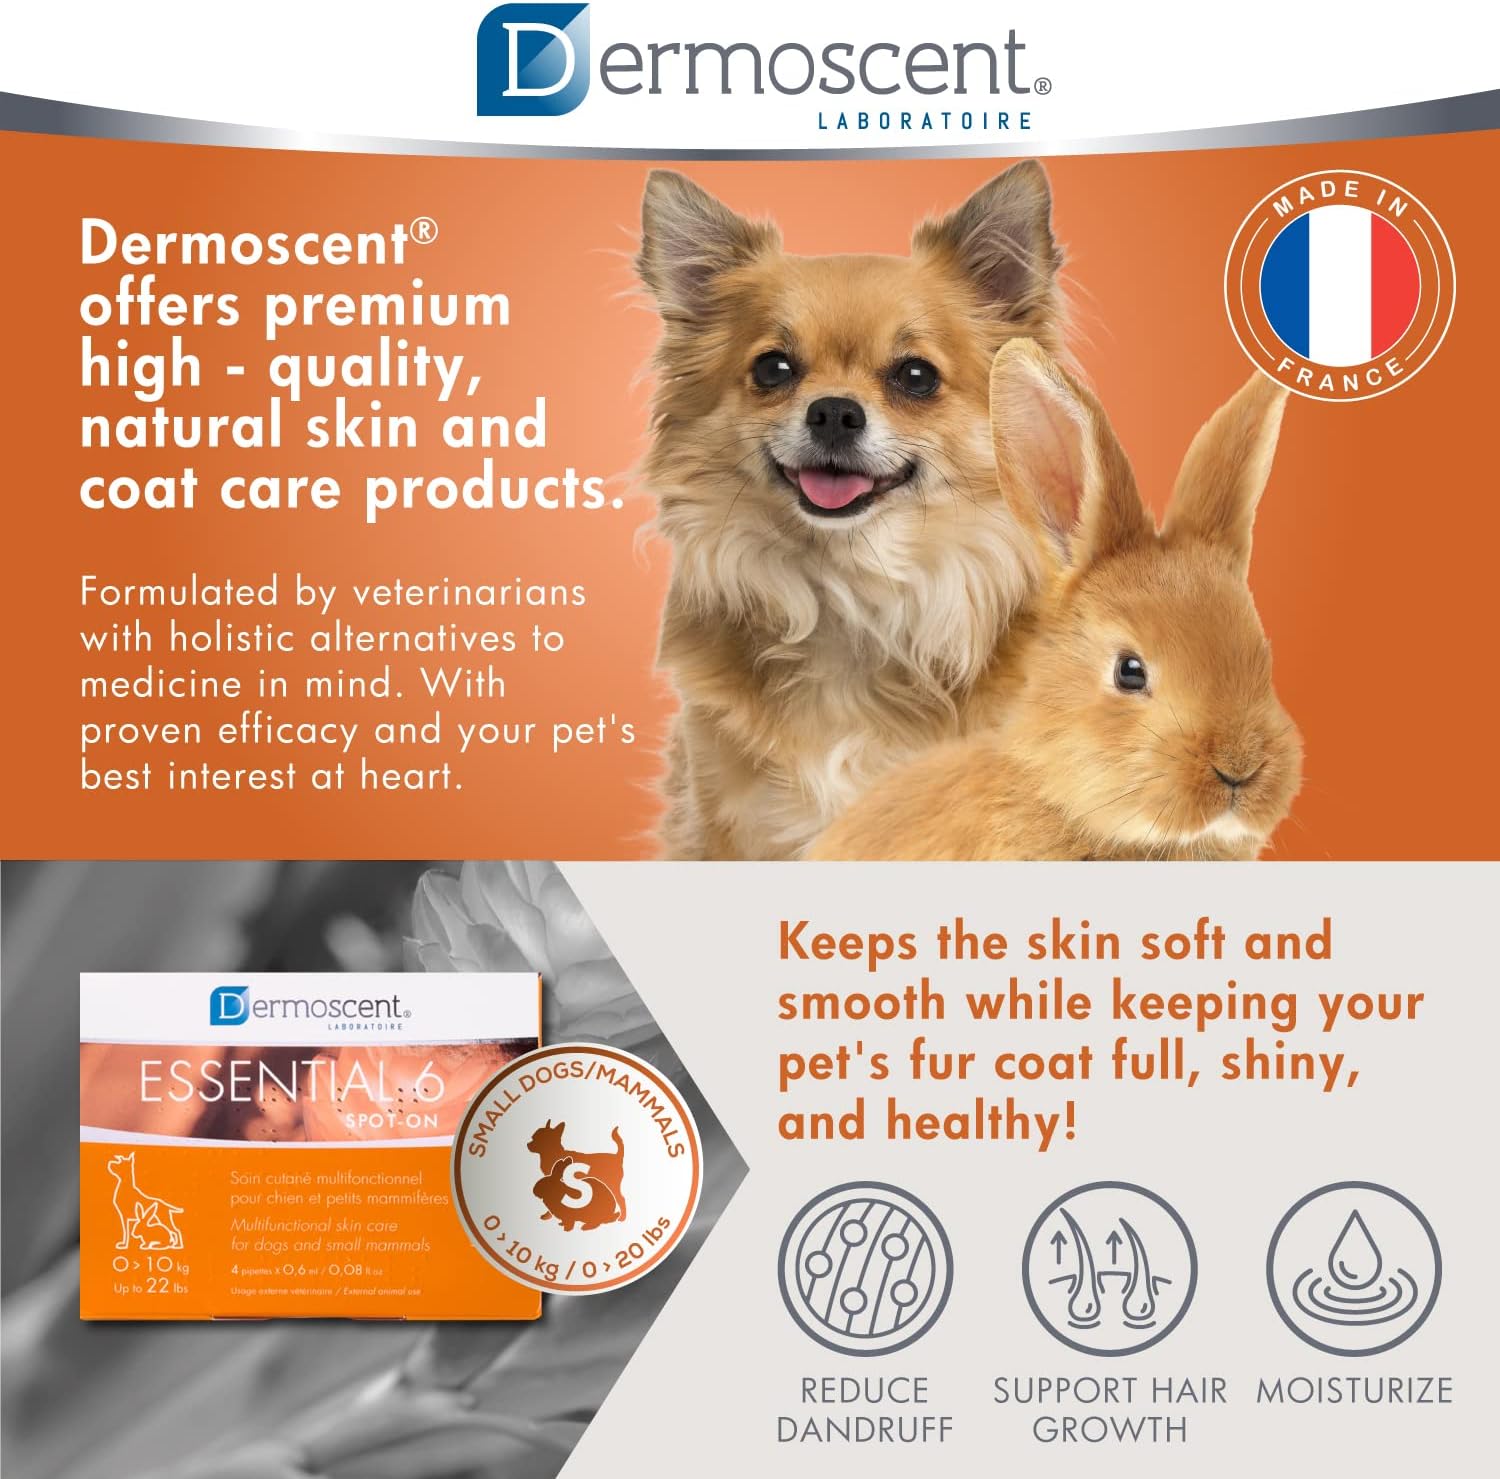 Dermoscent Essential 6 spot-on - Dog Skin Care for Dandruff & Allergy Relief with Vitamin E Oil - Anti Itch for Dogs - Dog & Small Mammals 0-10 kg - 4 Pipettes of 0.6 ml : Pet Health Care Supplies : Pet Supplies